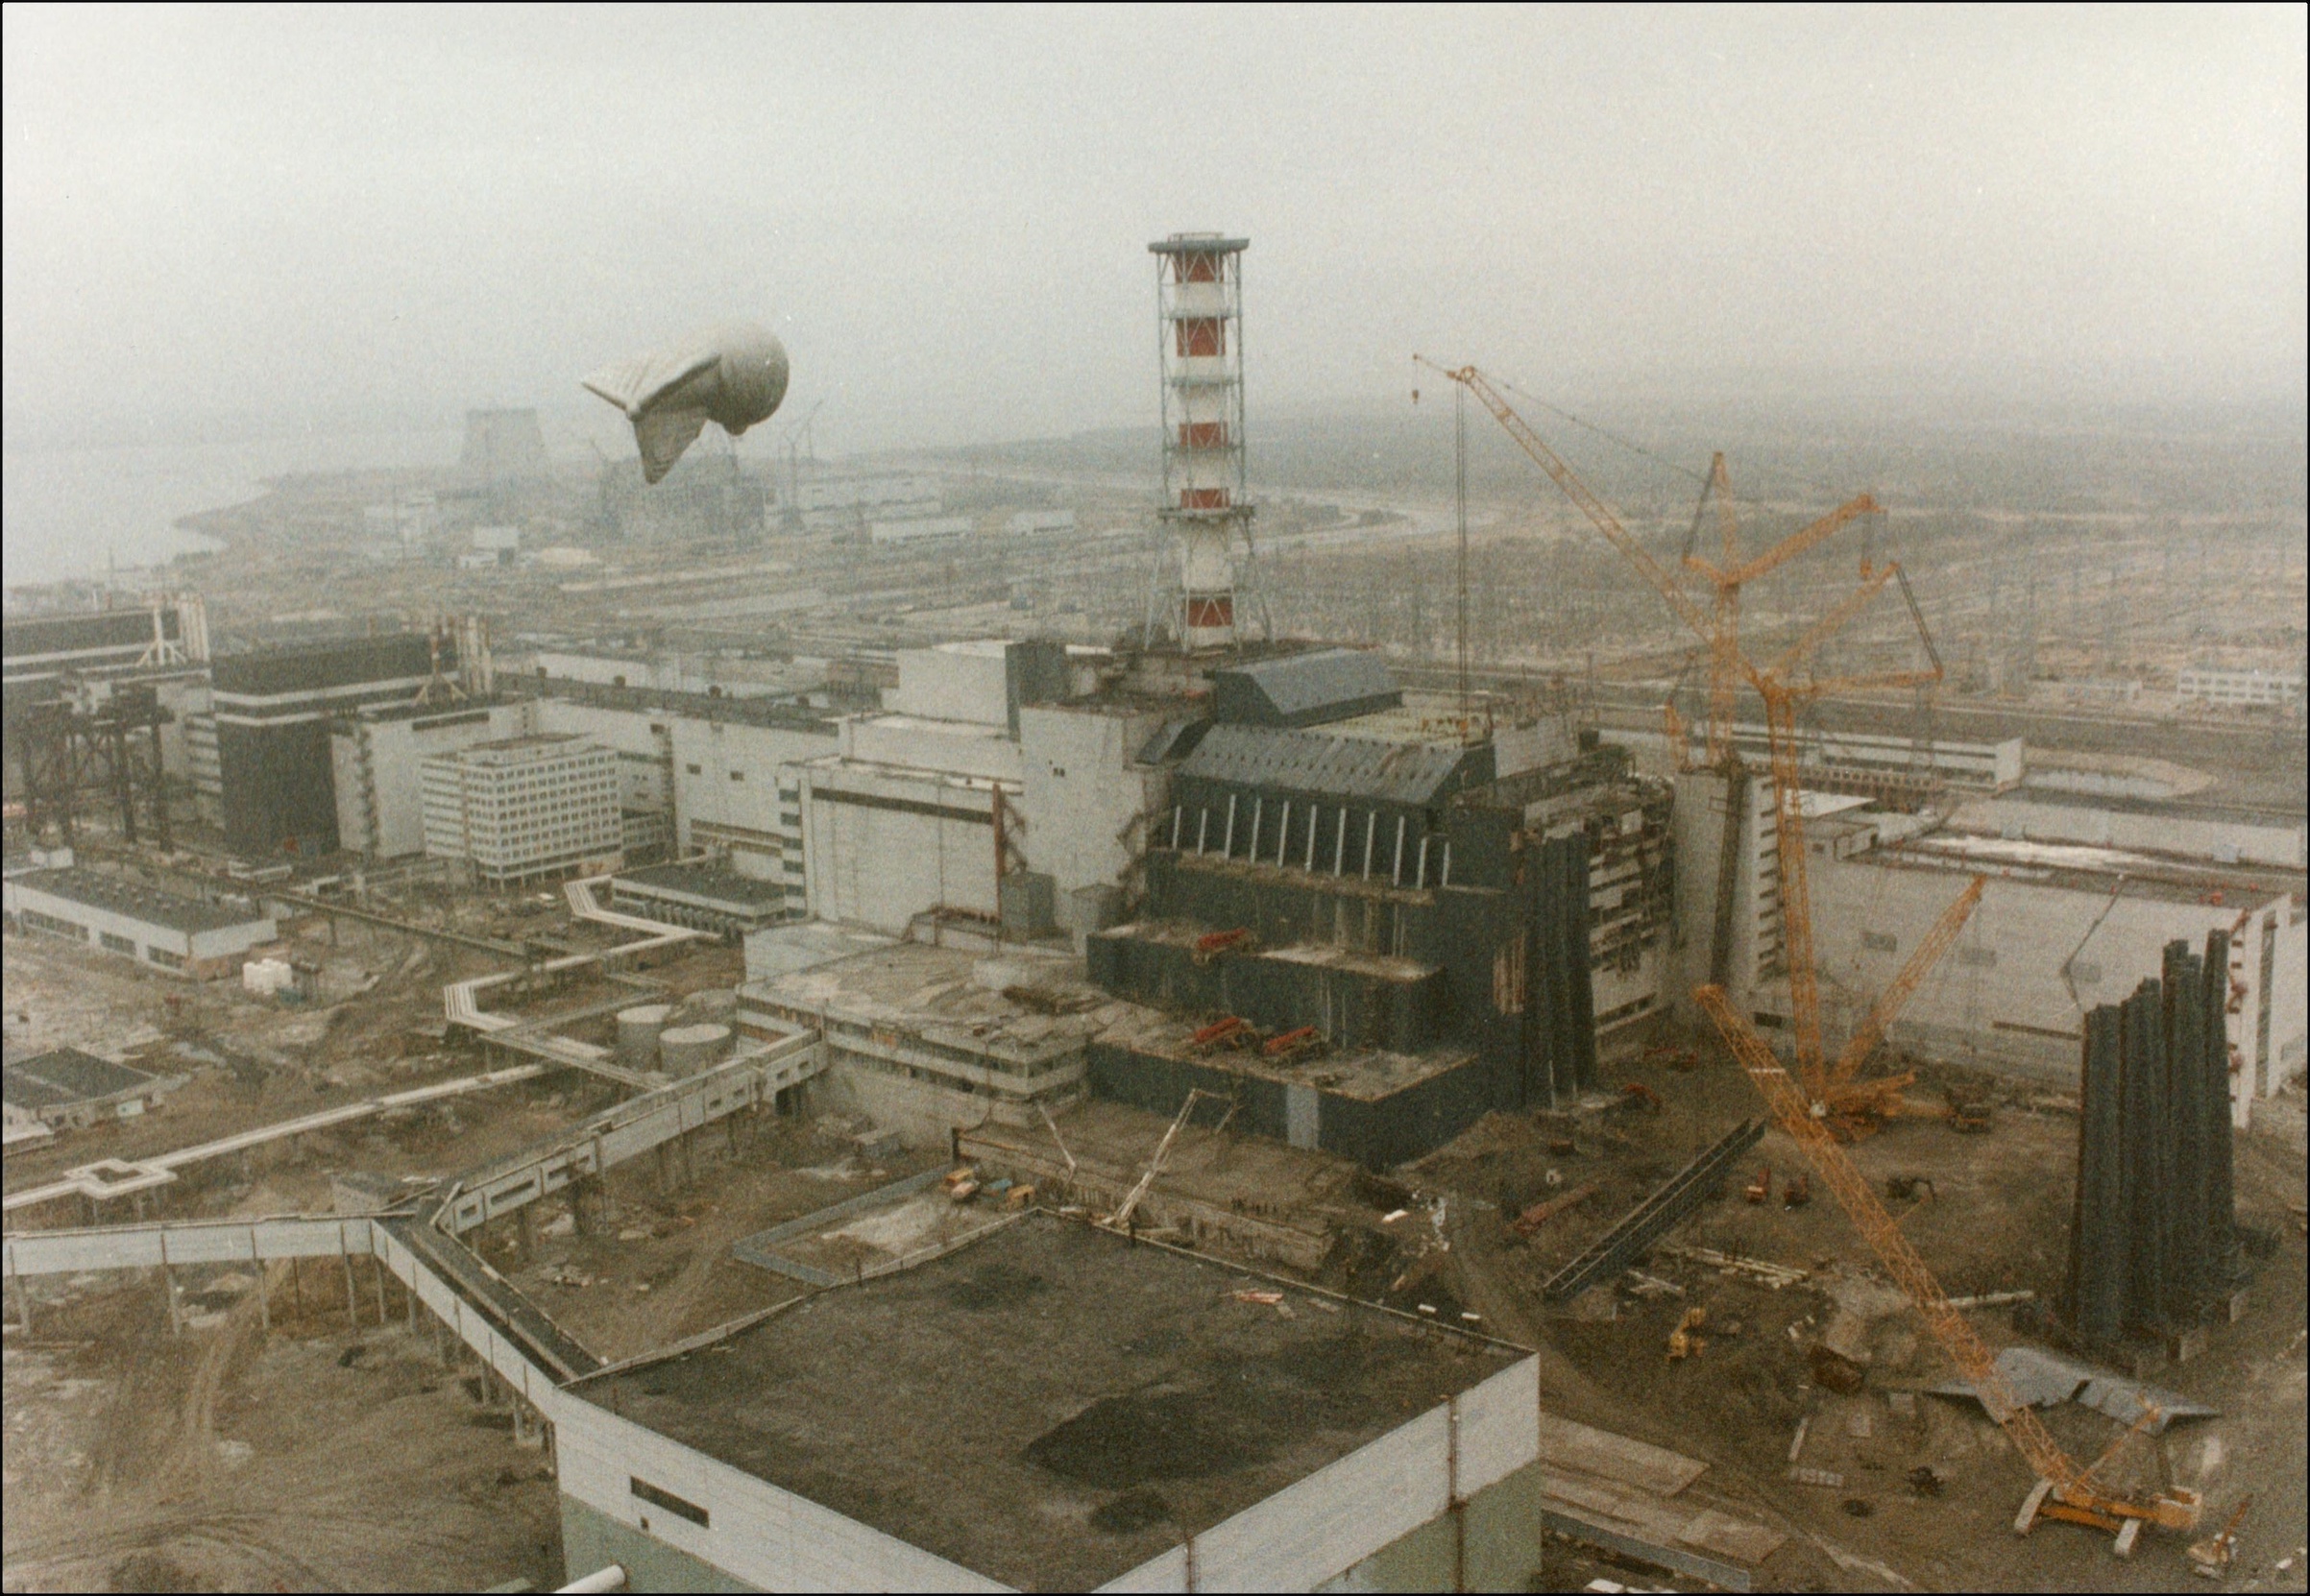 View of the Chernobyl Nuclear power after the explosion on April 26, 1986 in Chernobyl, Ukraine. (Gamma-Rapho via Getty Images)